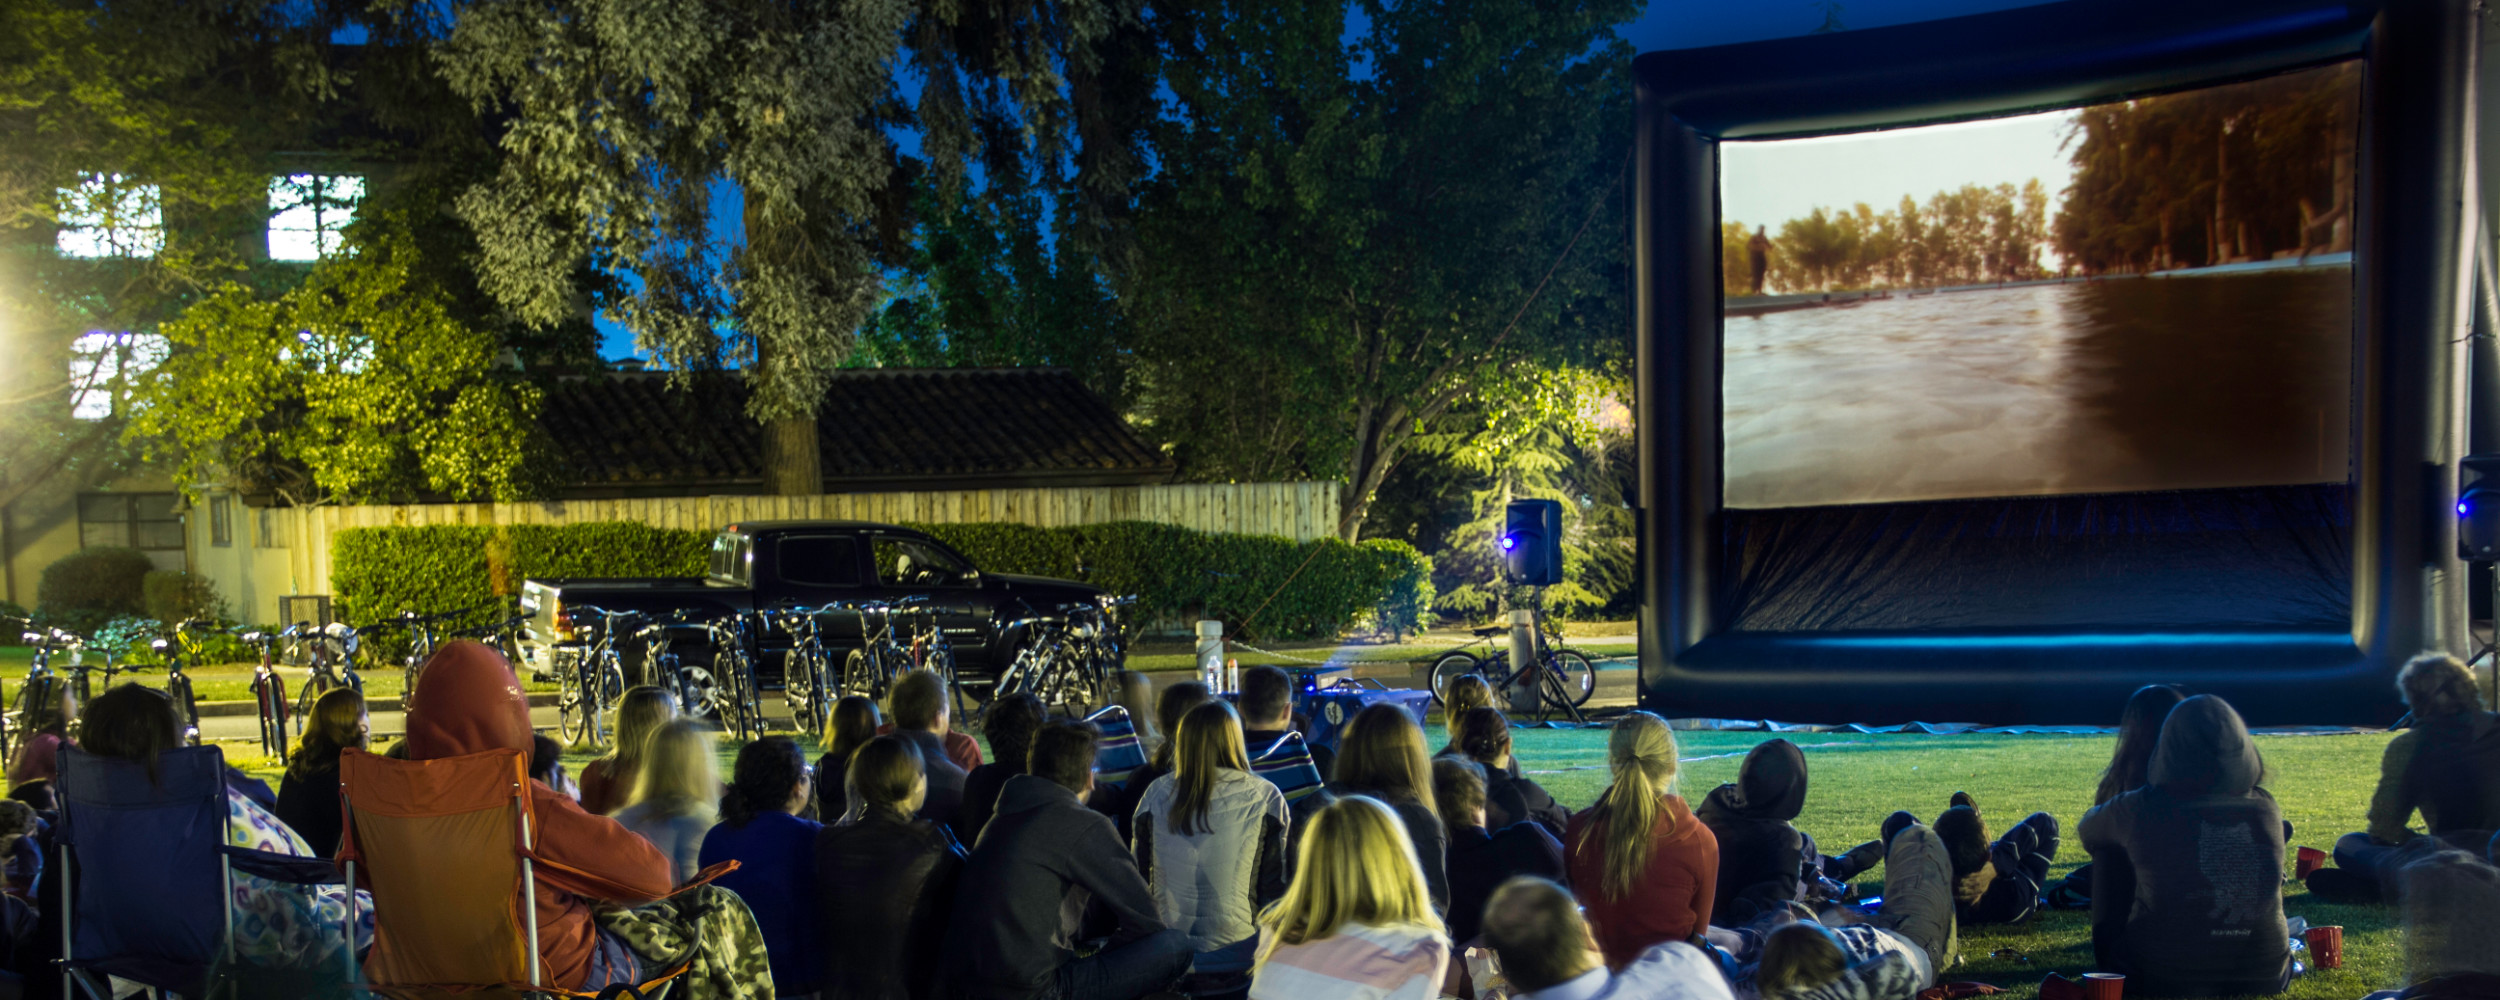 Mississippi-outdoor-movie-party